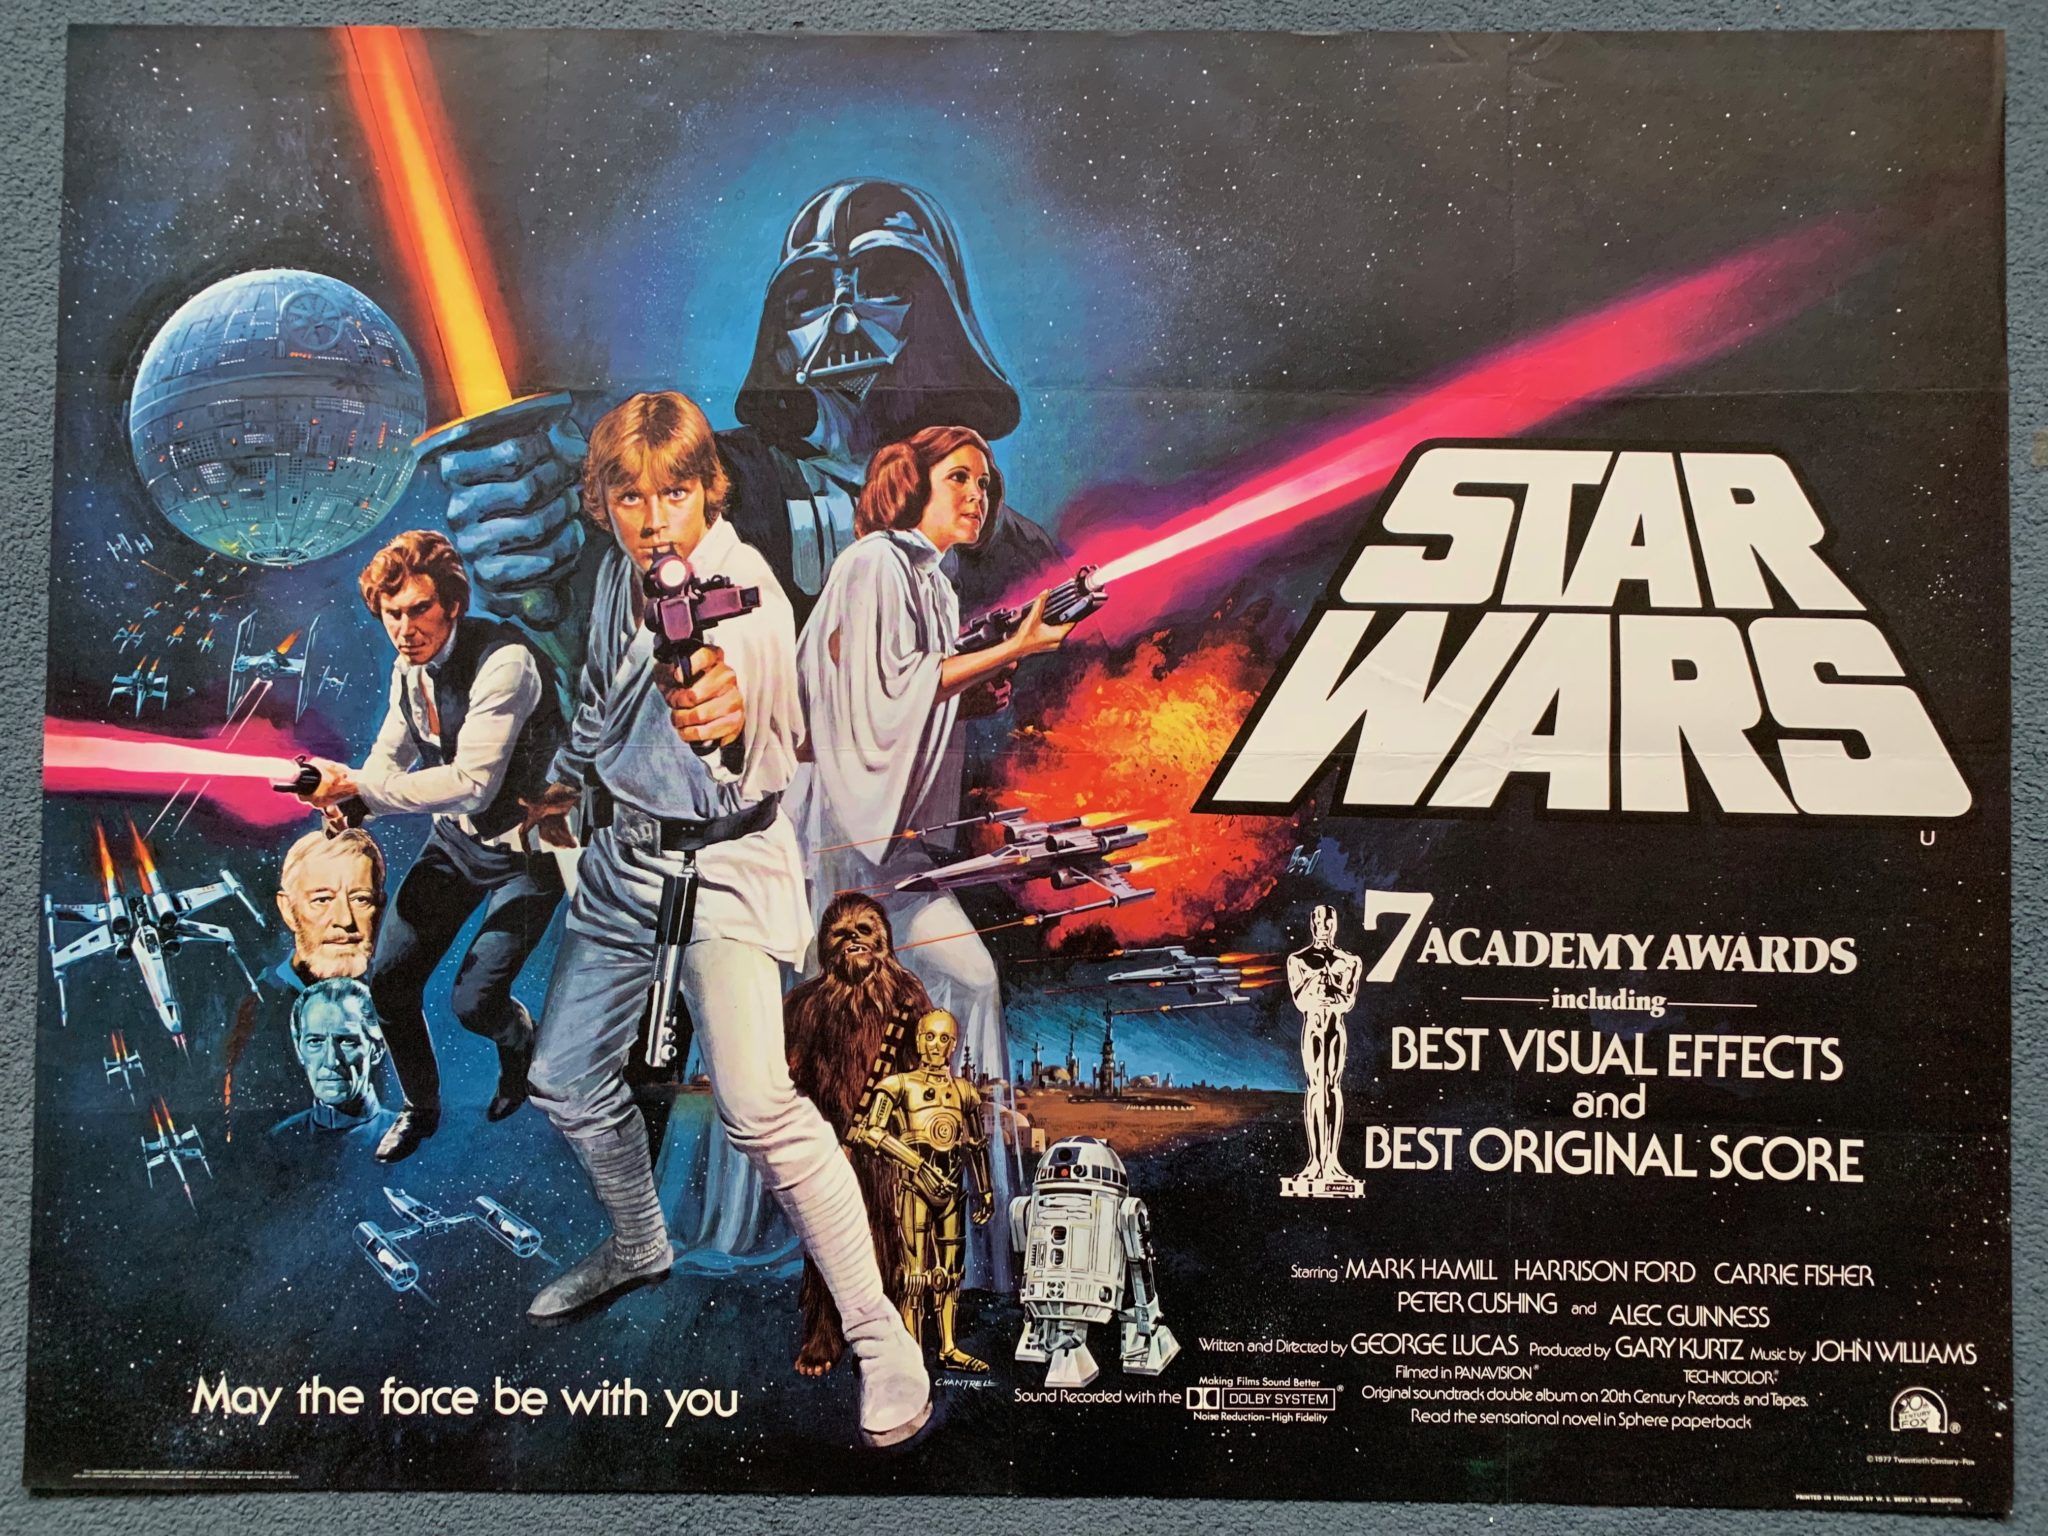 STAR WARS: THE RISE OF COLLECTING